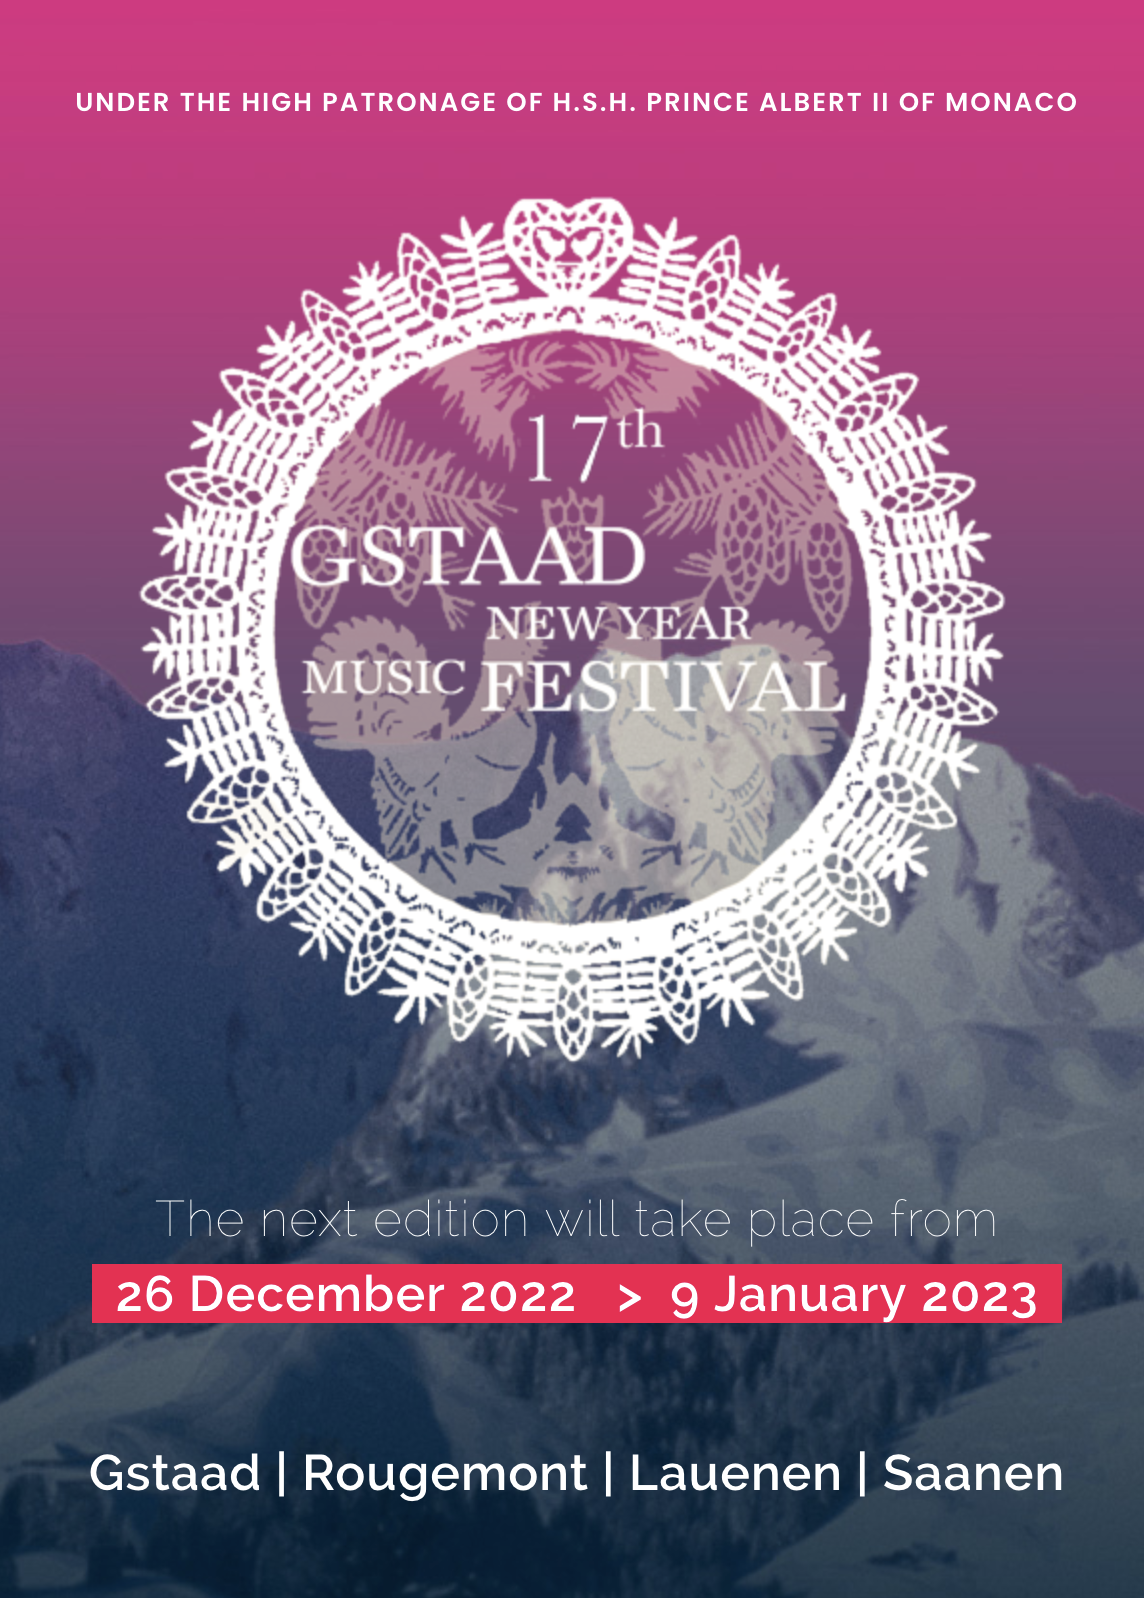 Gstaad New Year Music Festival - Illyria Communication